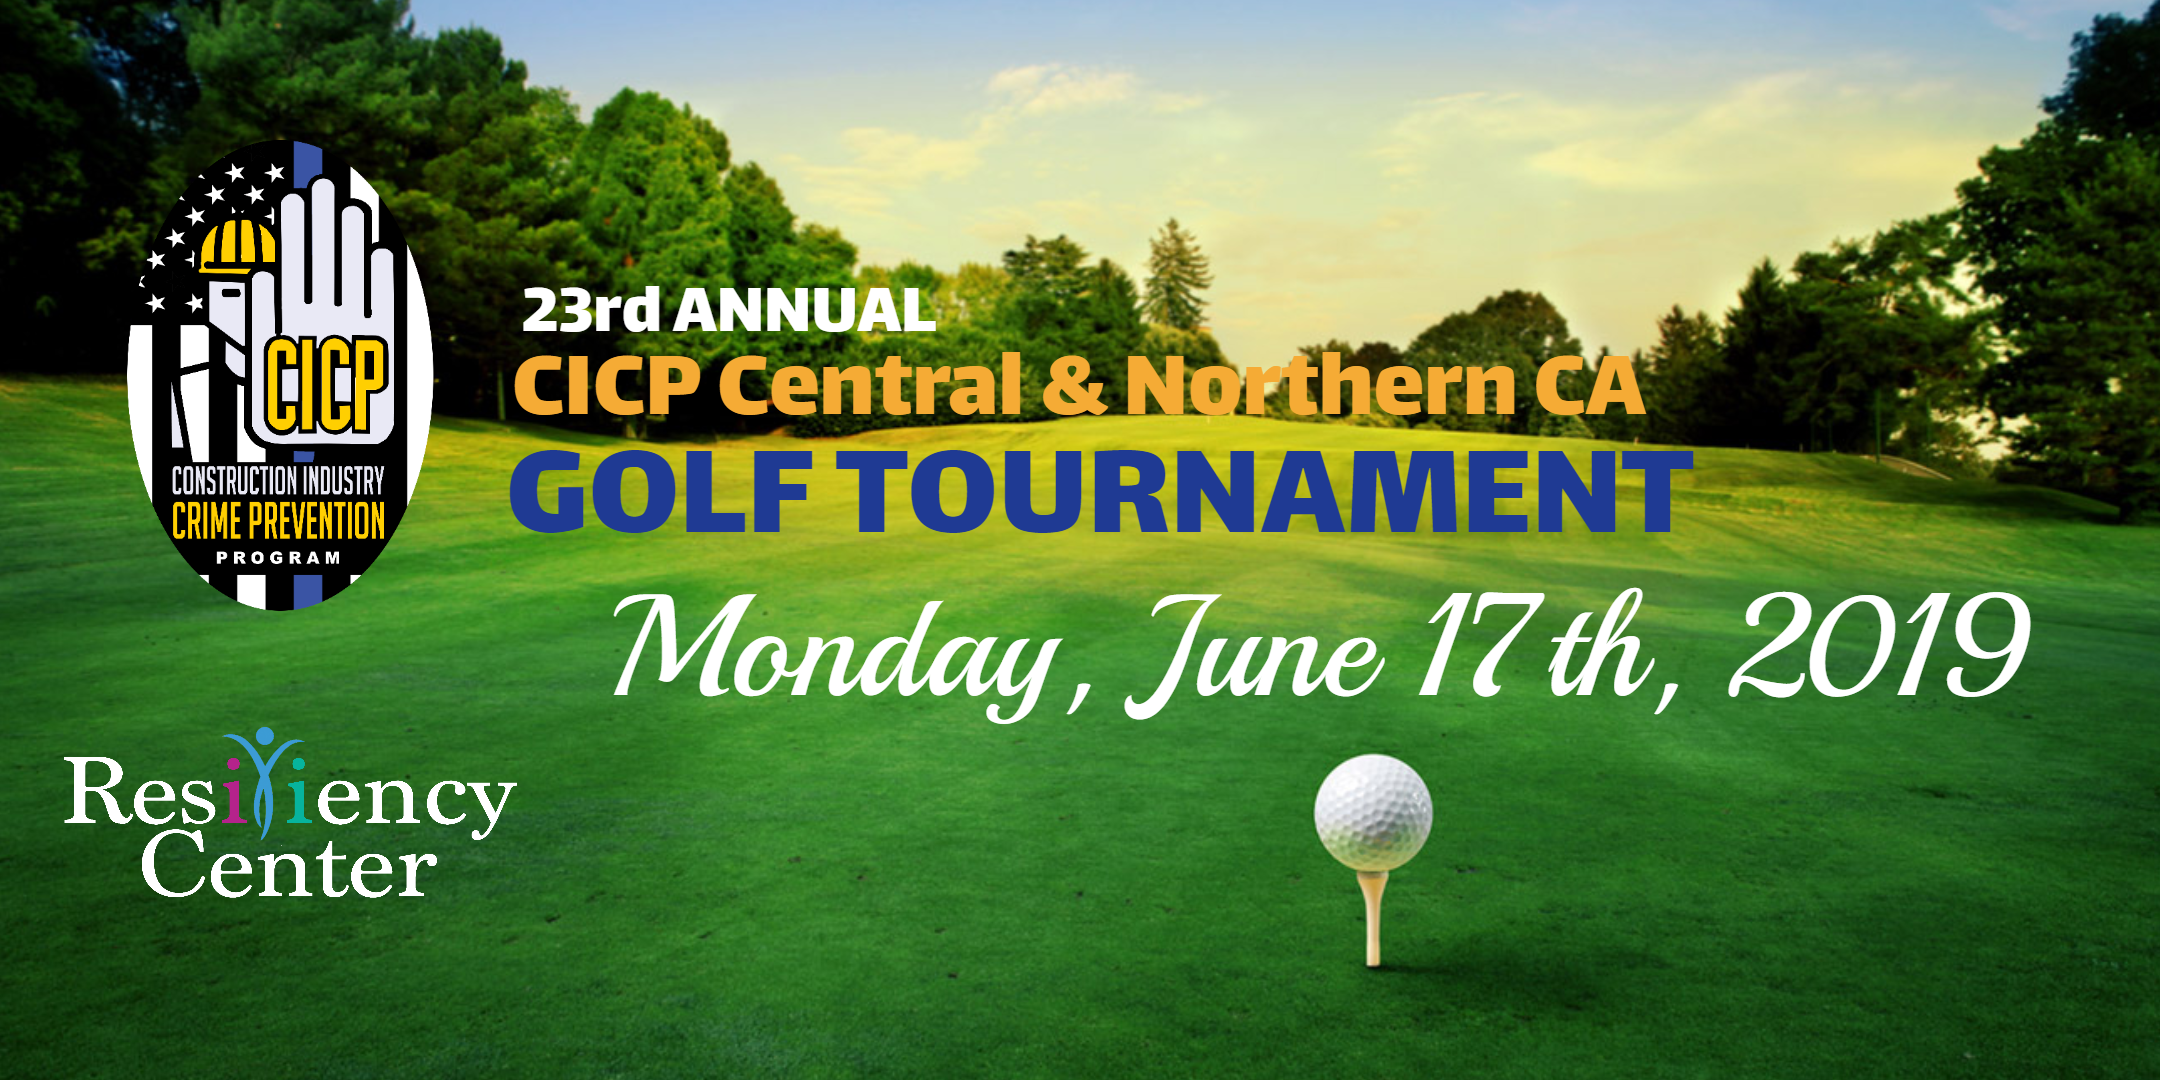 23rd Annual CICP Central & Northern CA Golf Tournament